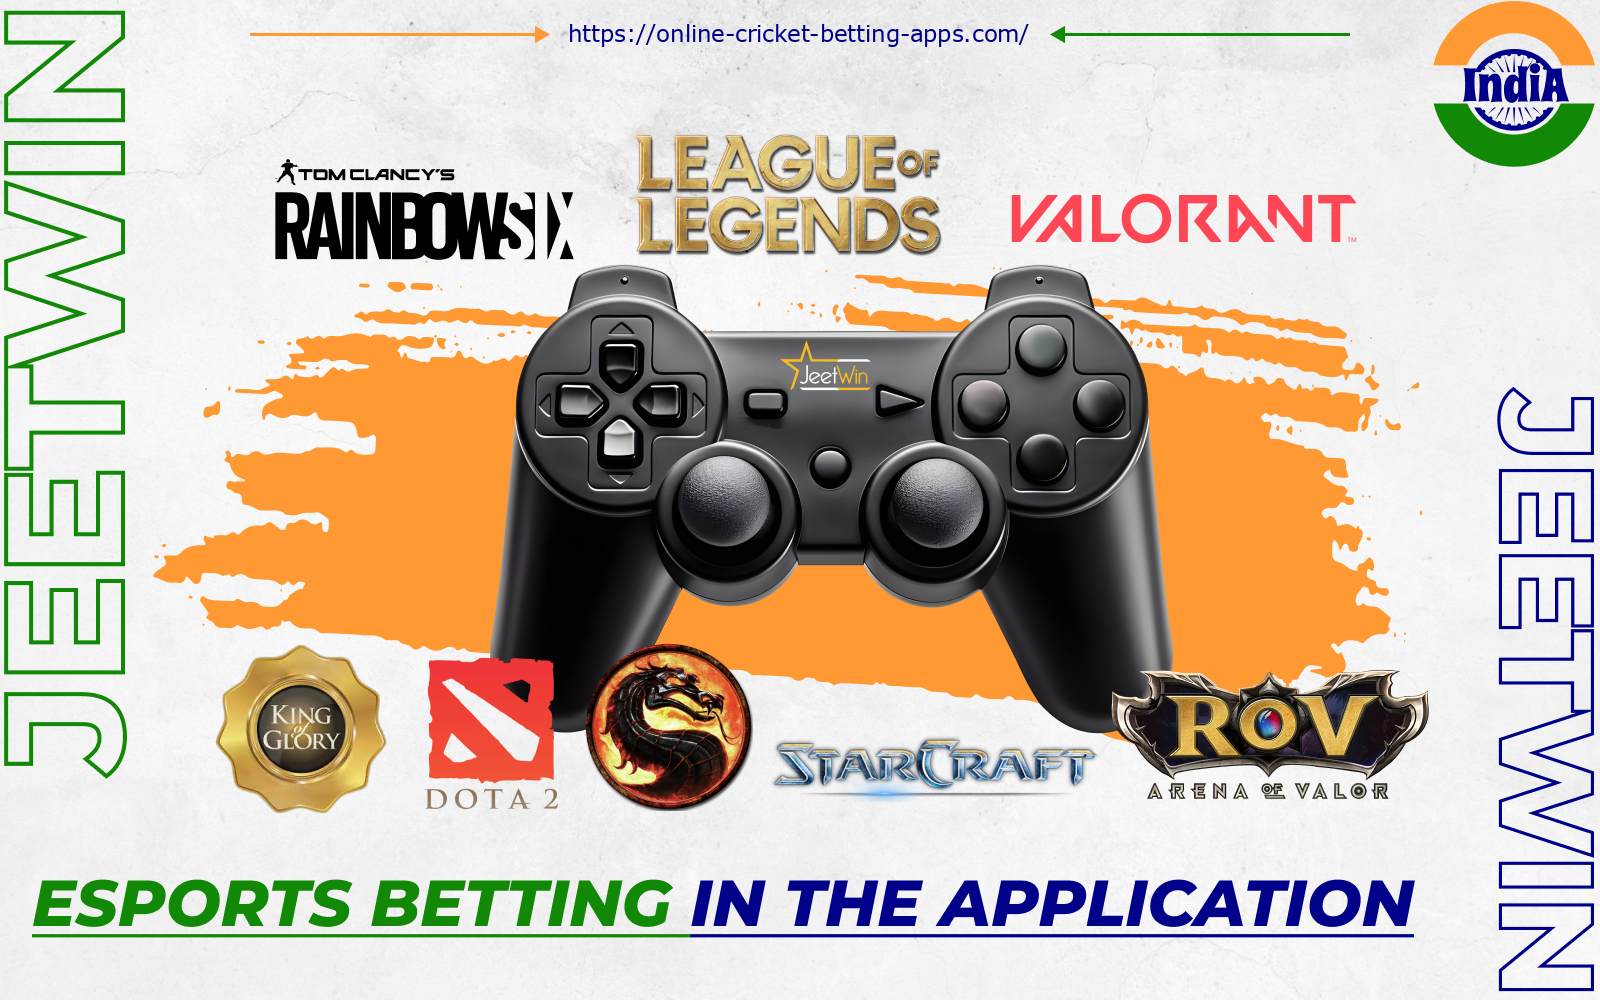 Users of the Jeetwin app from India can bet on all popular cyber sports disciplines